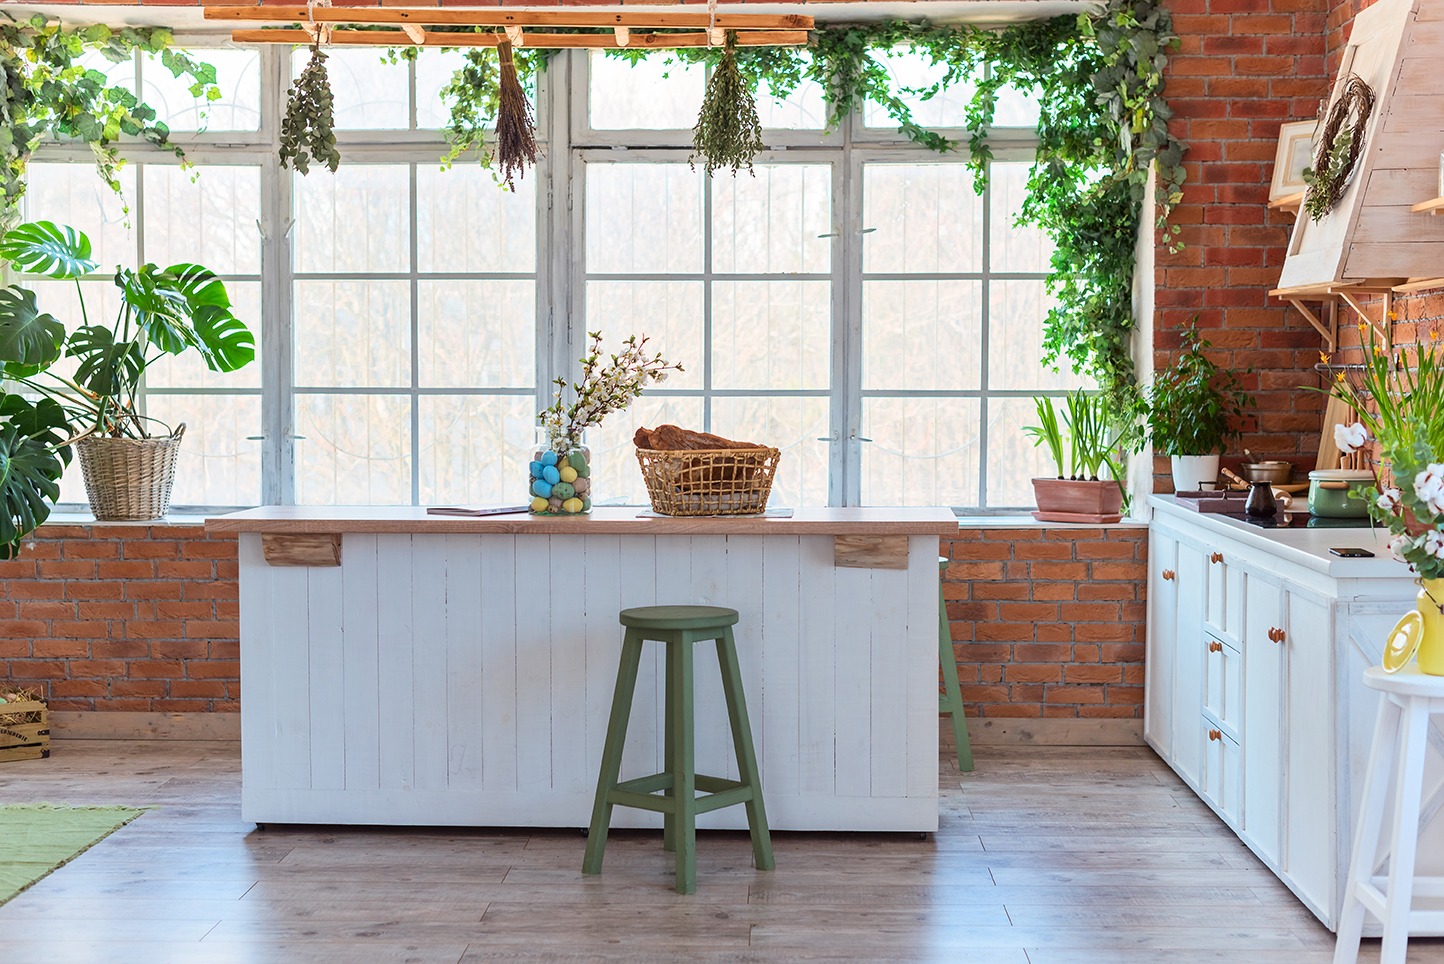 Kitchen in loft style with big window, decorated for Easter, brick wall, interior details